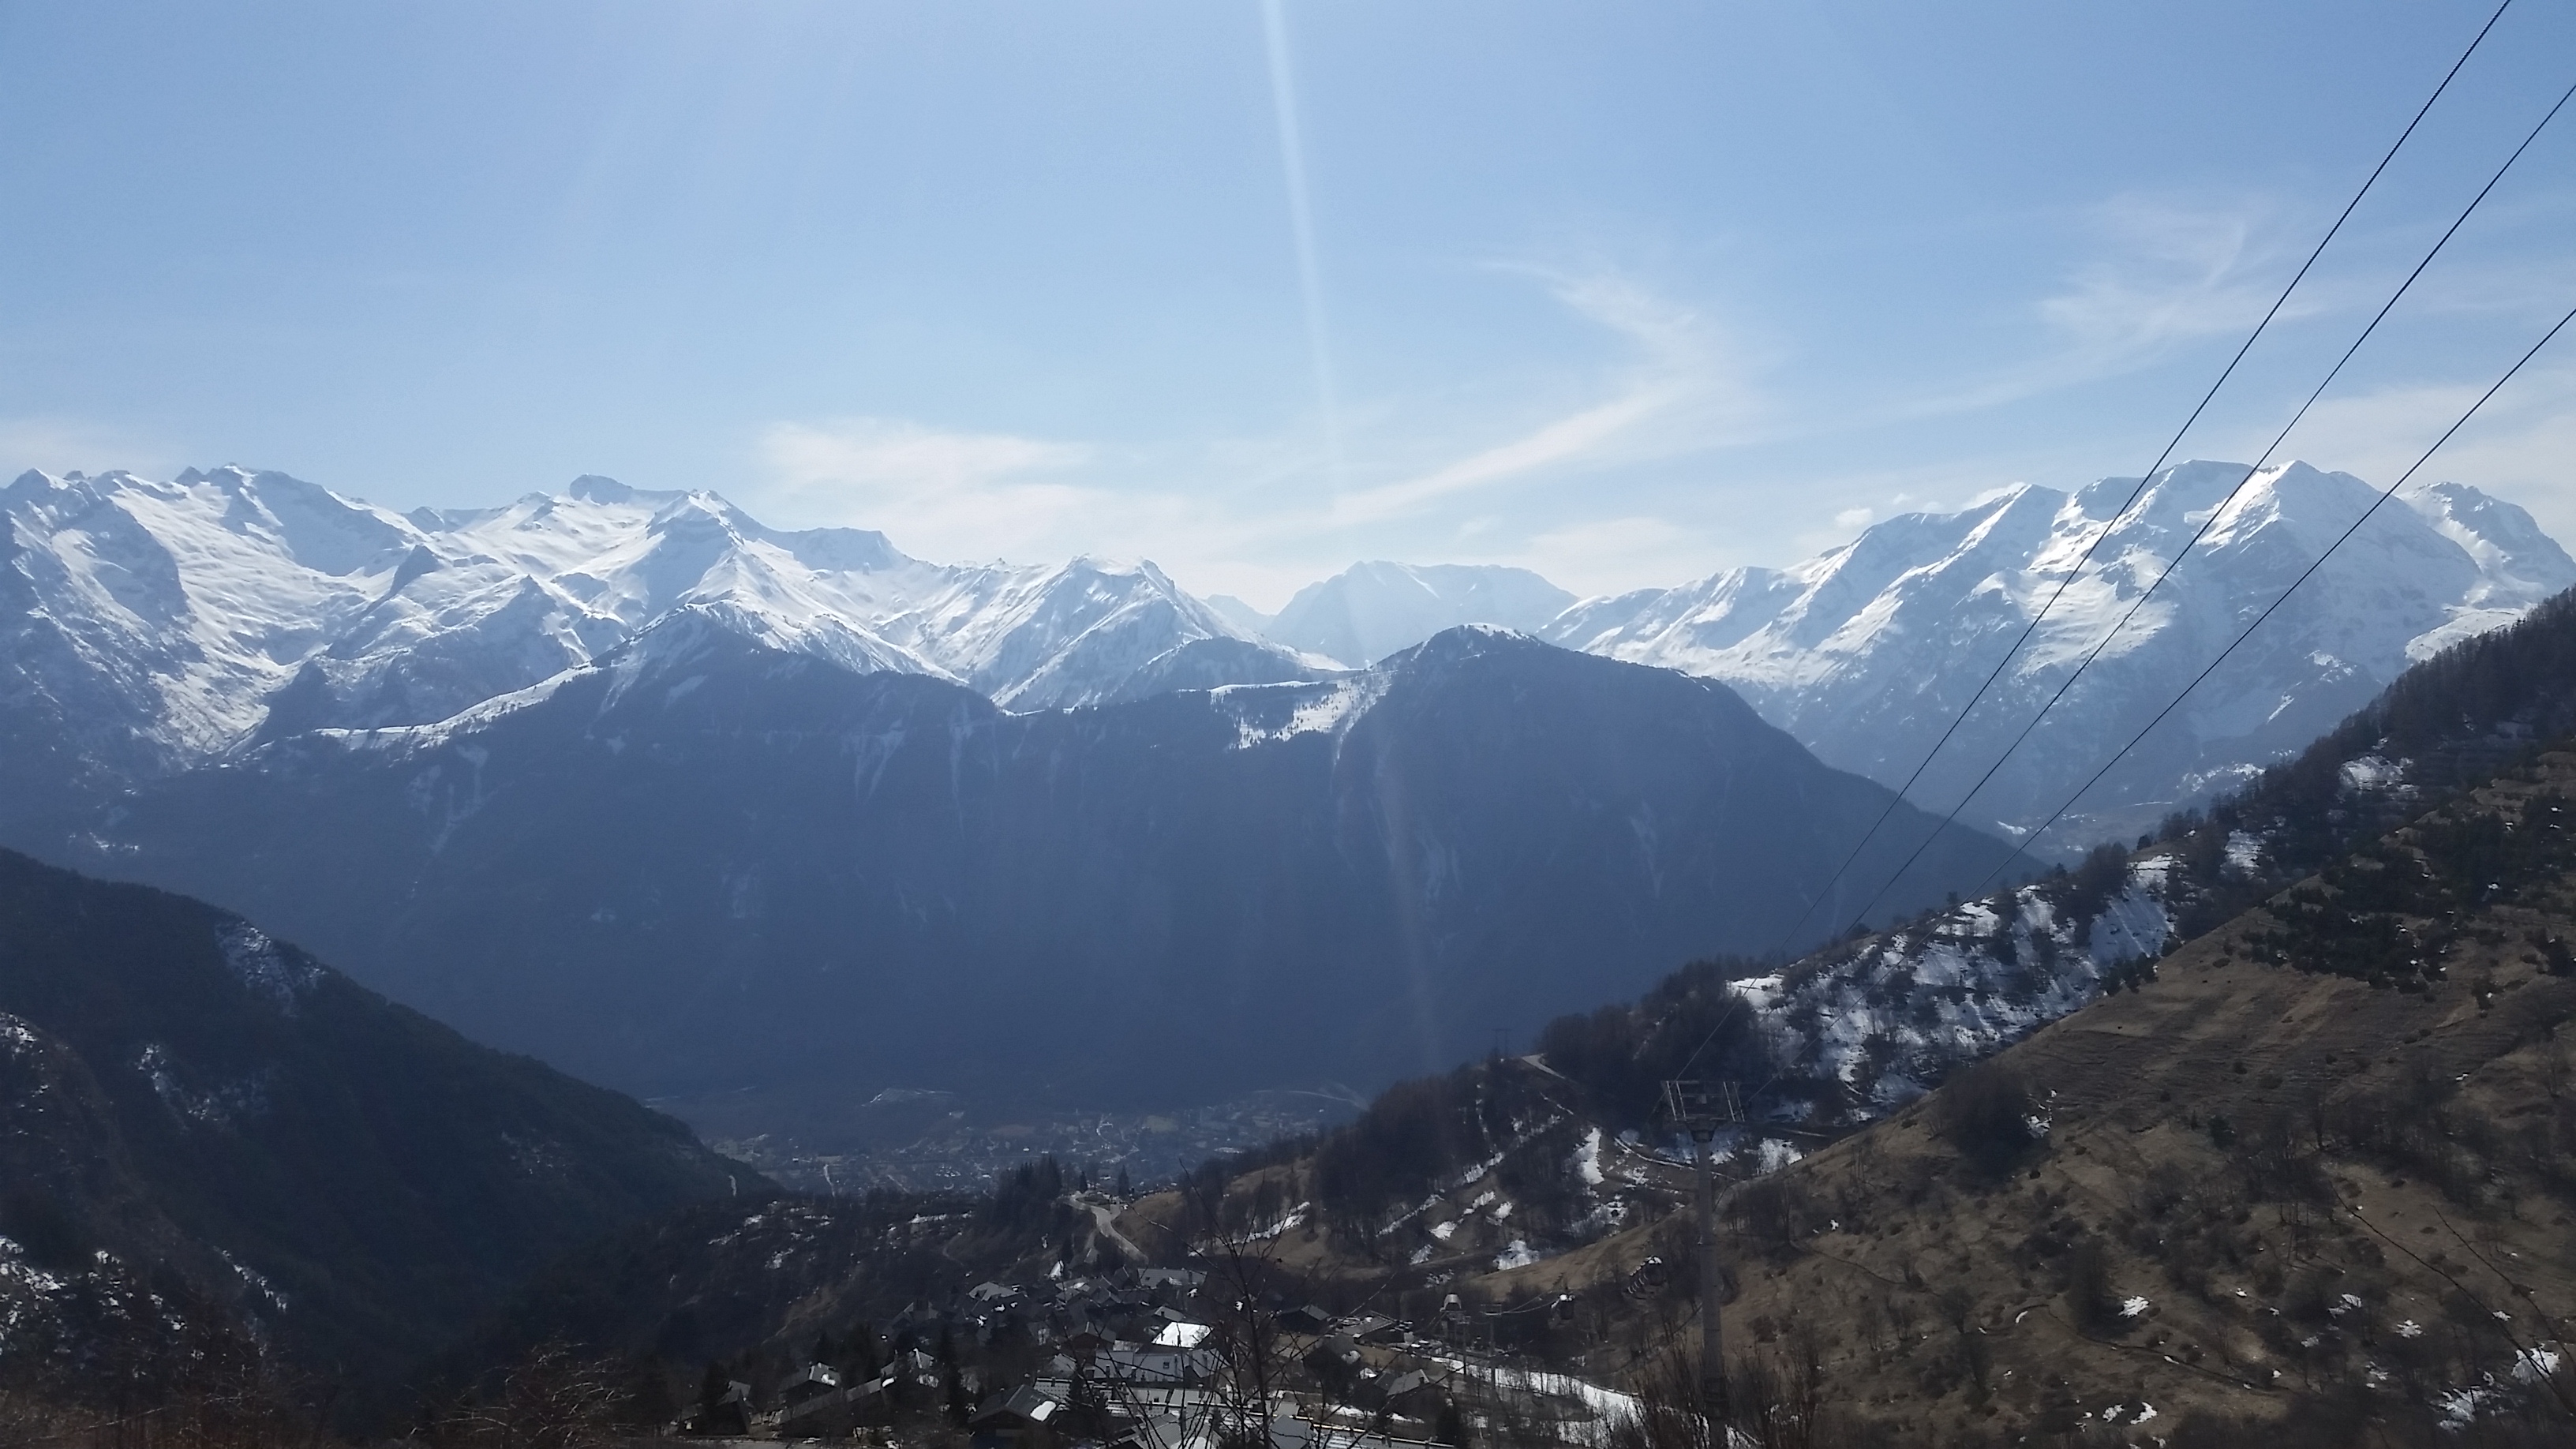 The view from the top of L'Alpe D'Huze